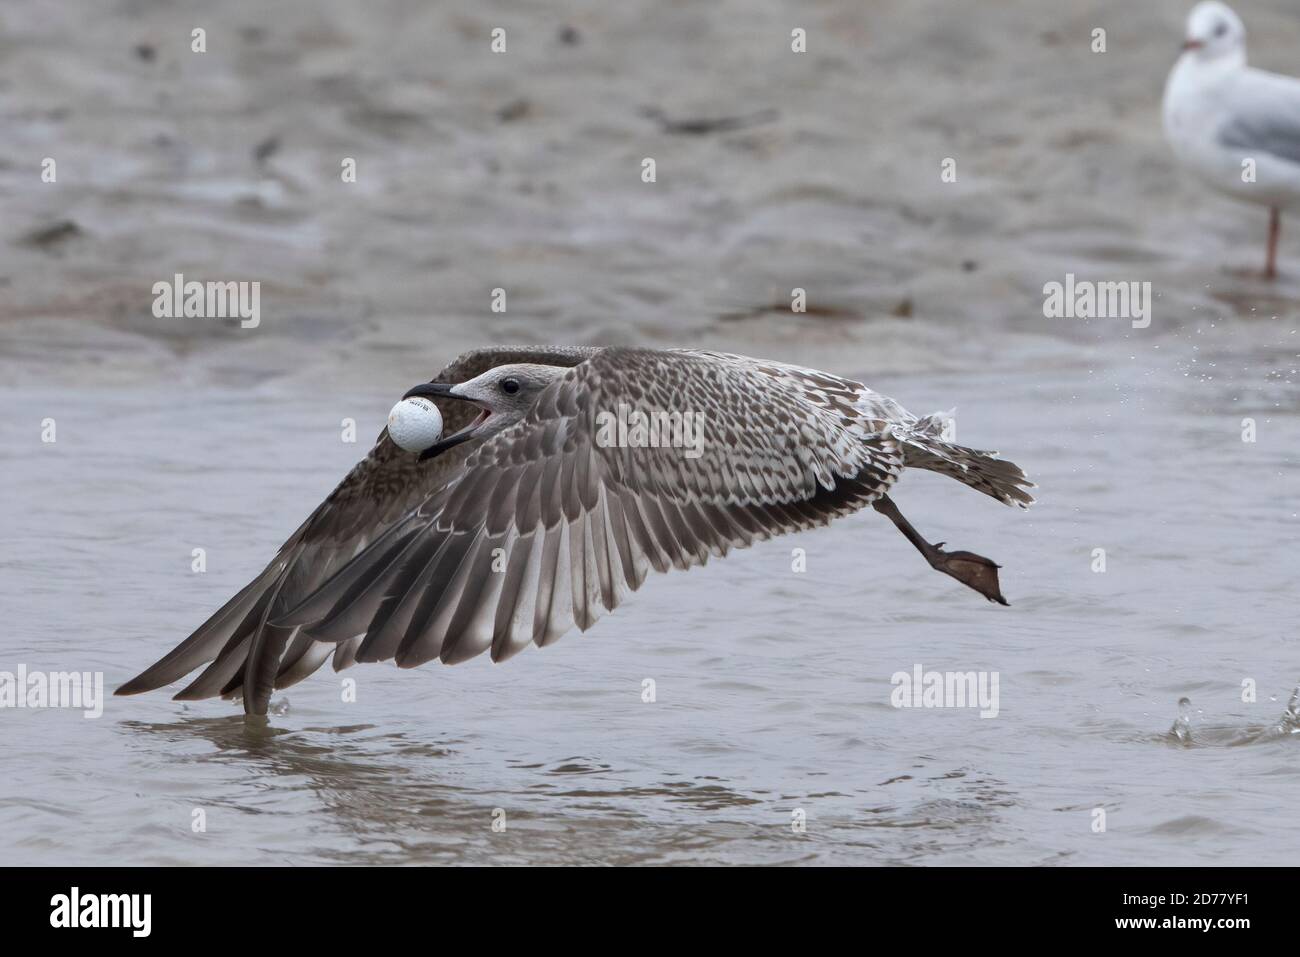 Juvenile herring gull (Larus argentatus) thinks a golf ball is an egg and tries to smash it. The young gull has one leg missing. Stock Photo